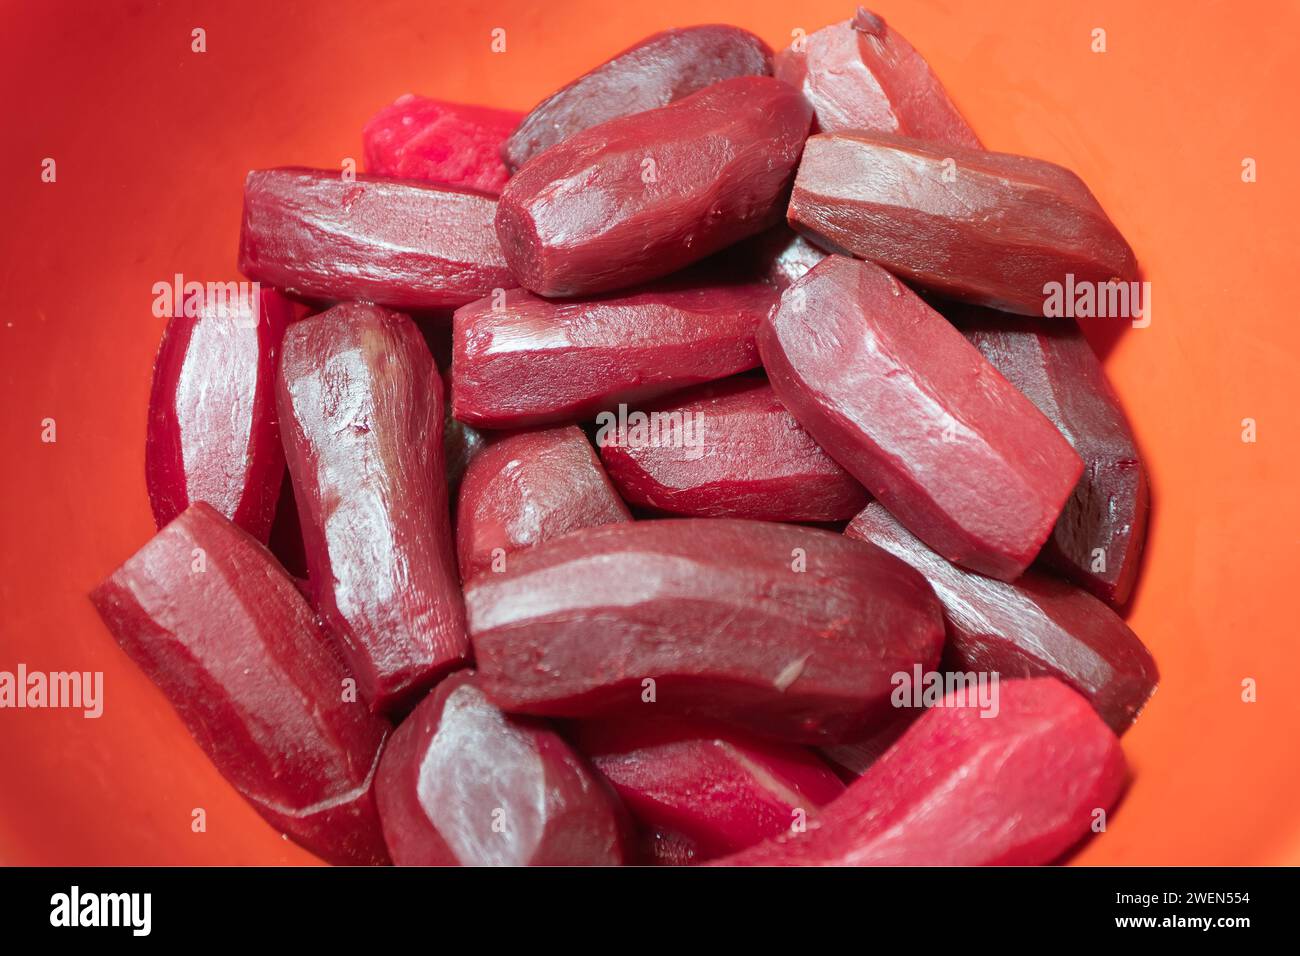 shaved beetroots prepared for cooking Stock Photo